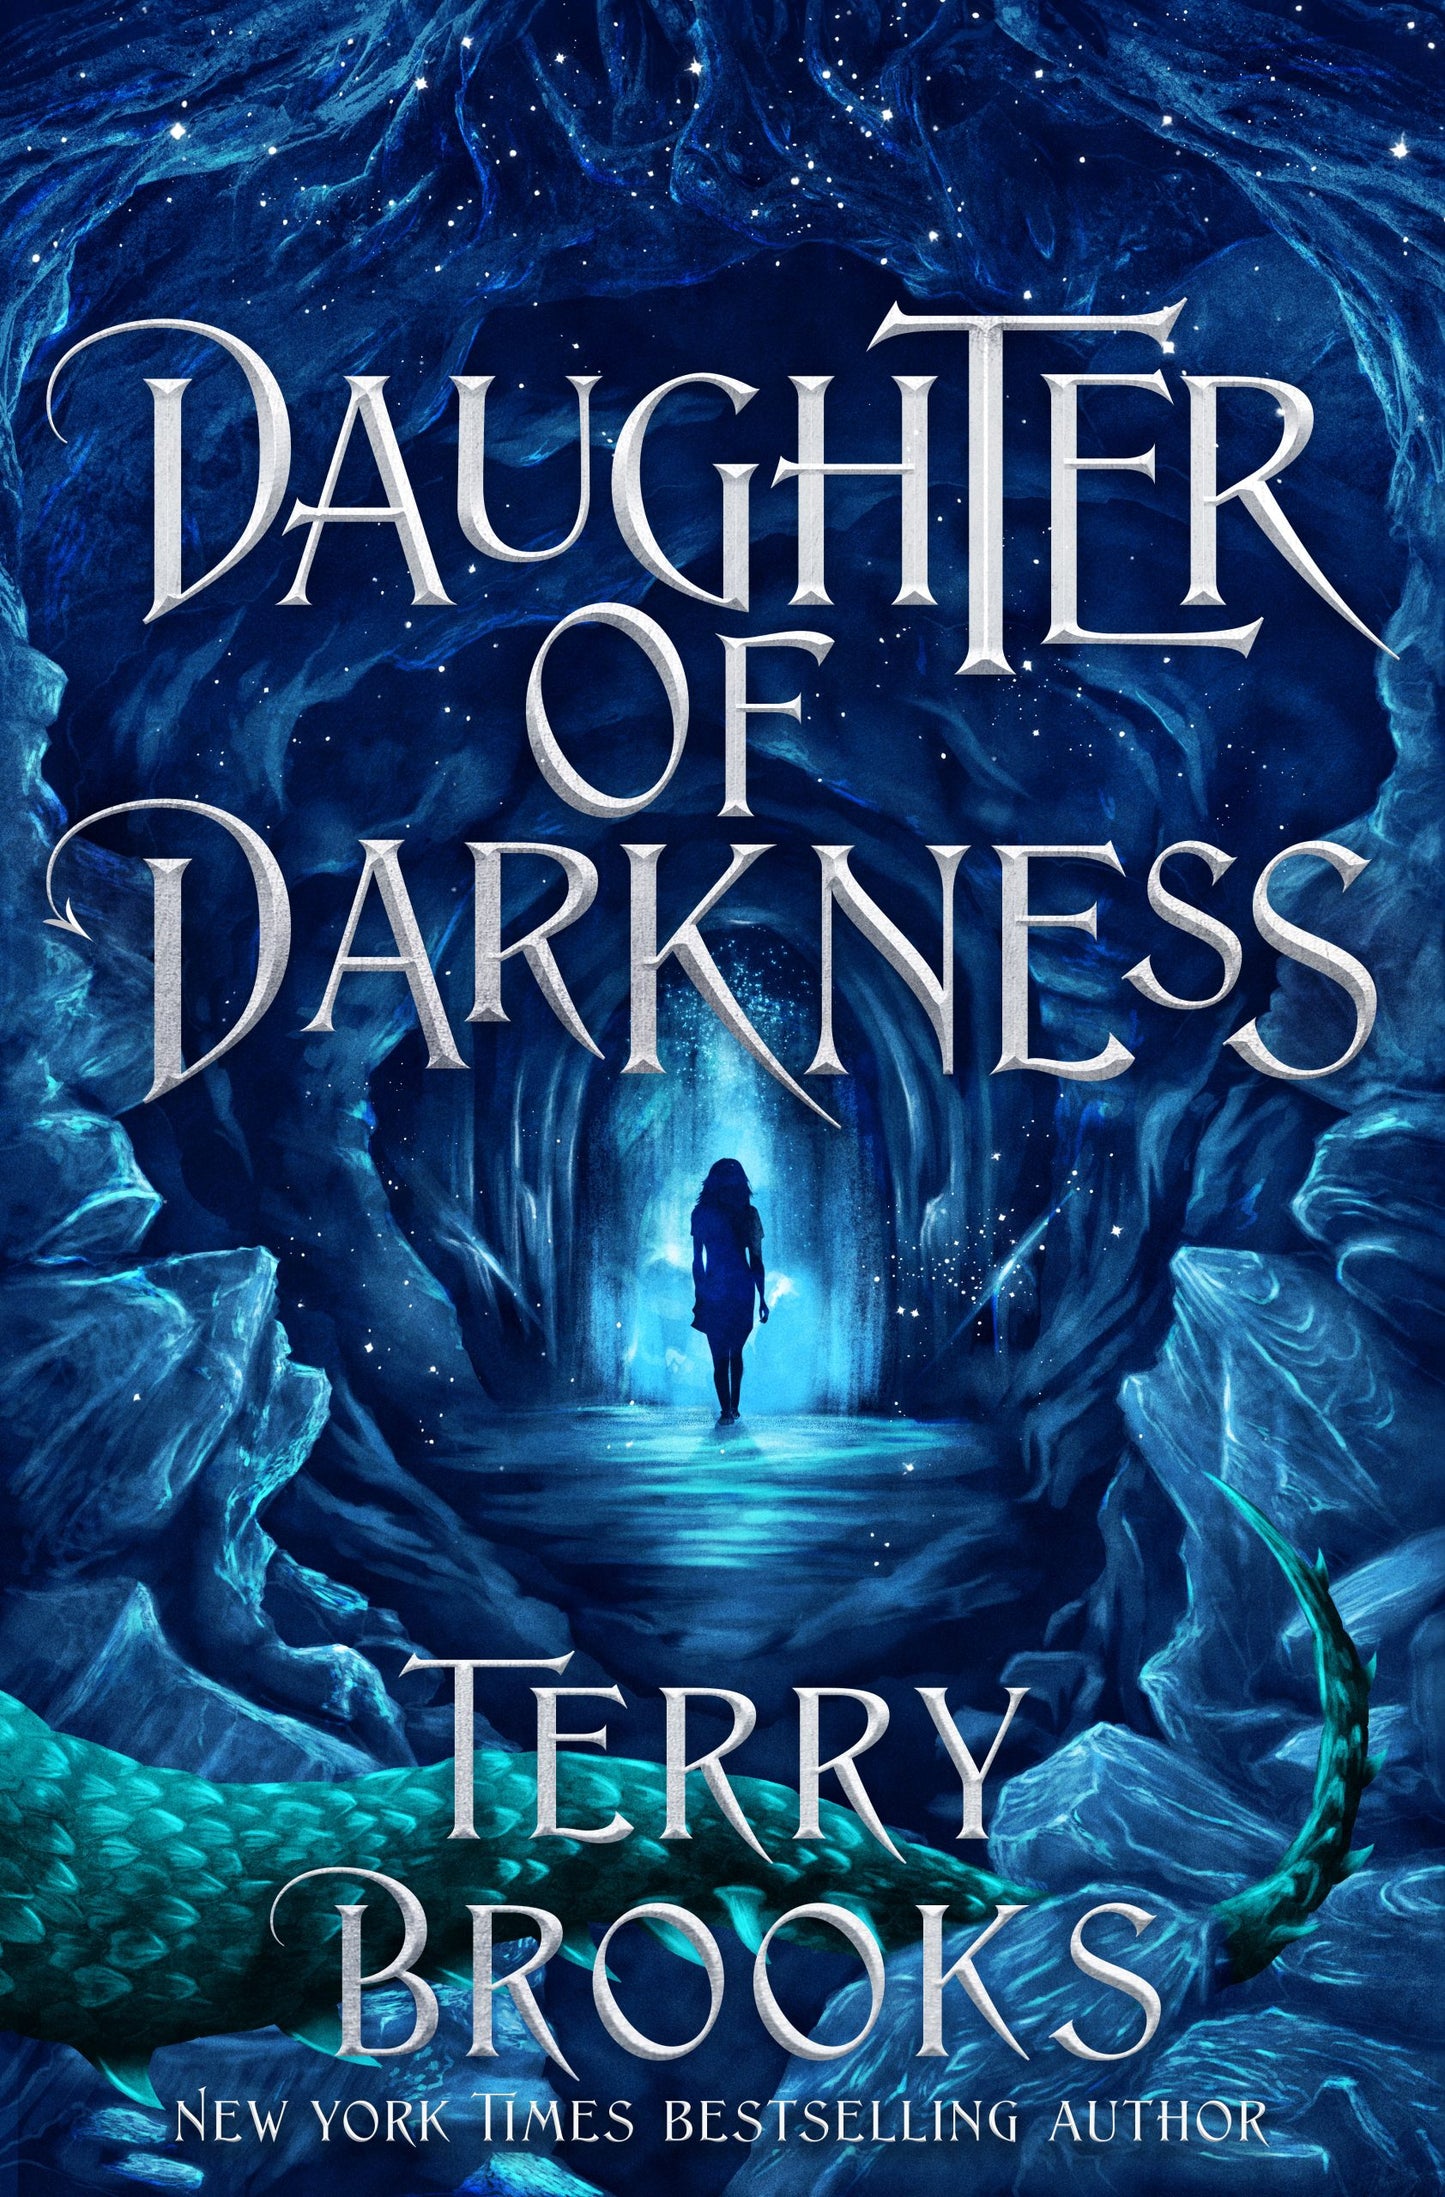 Daughter of Darkness by Terry Brooks